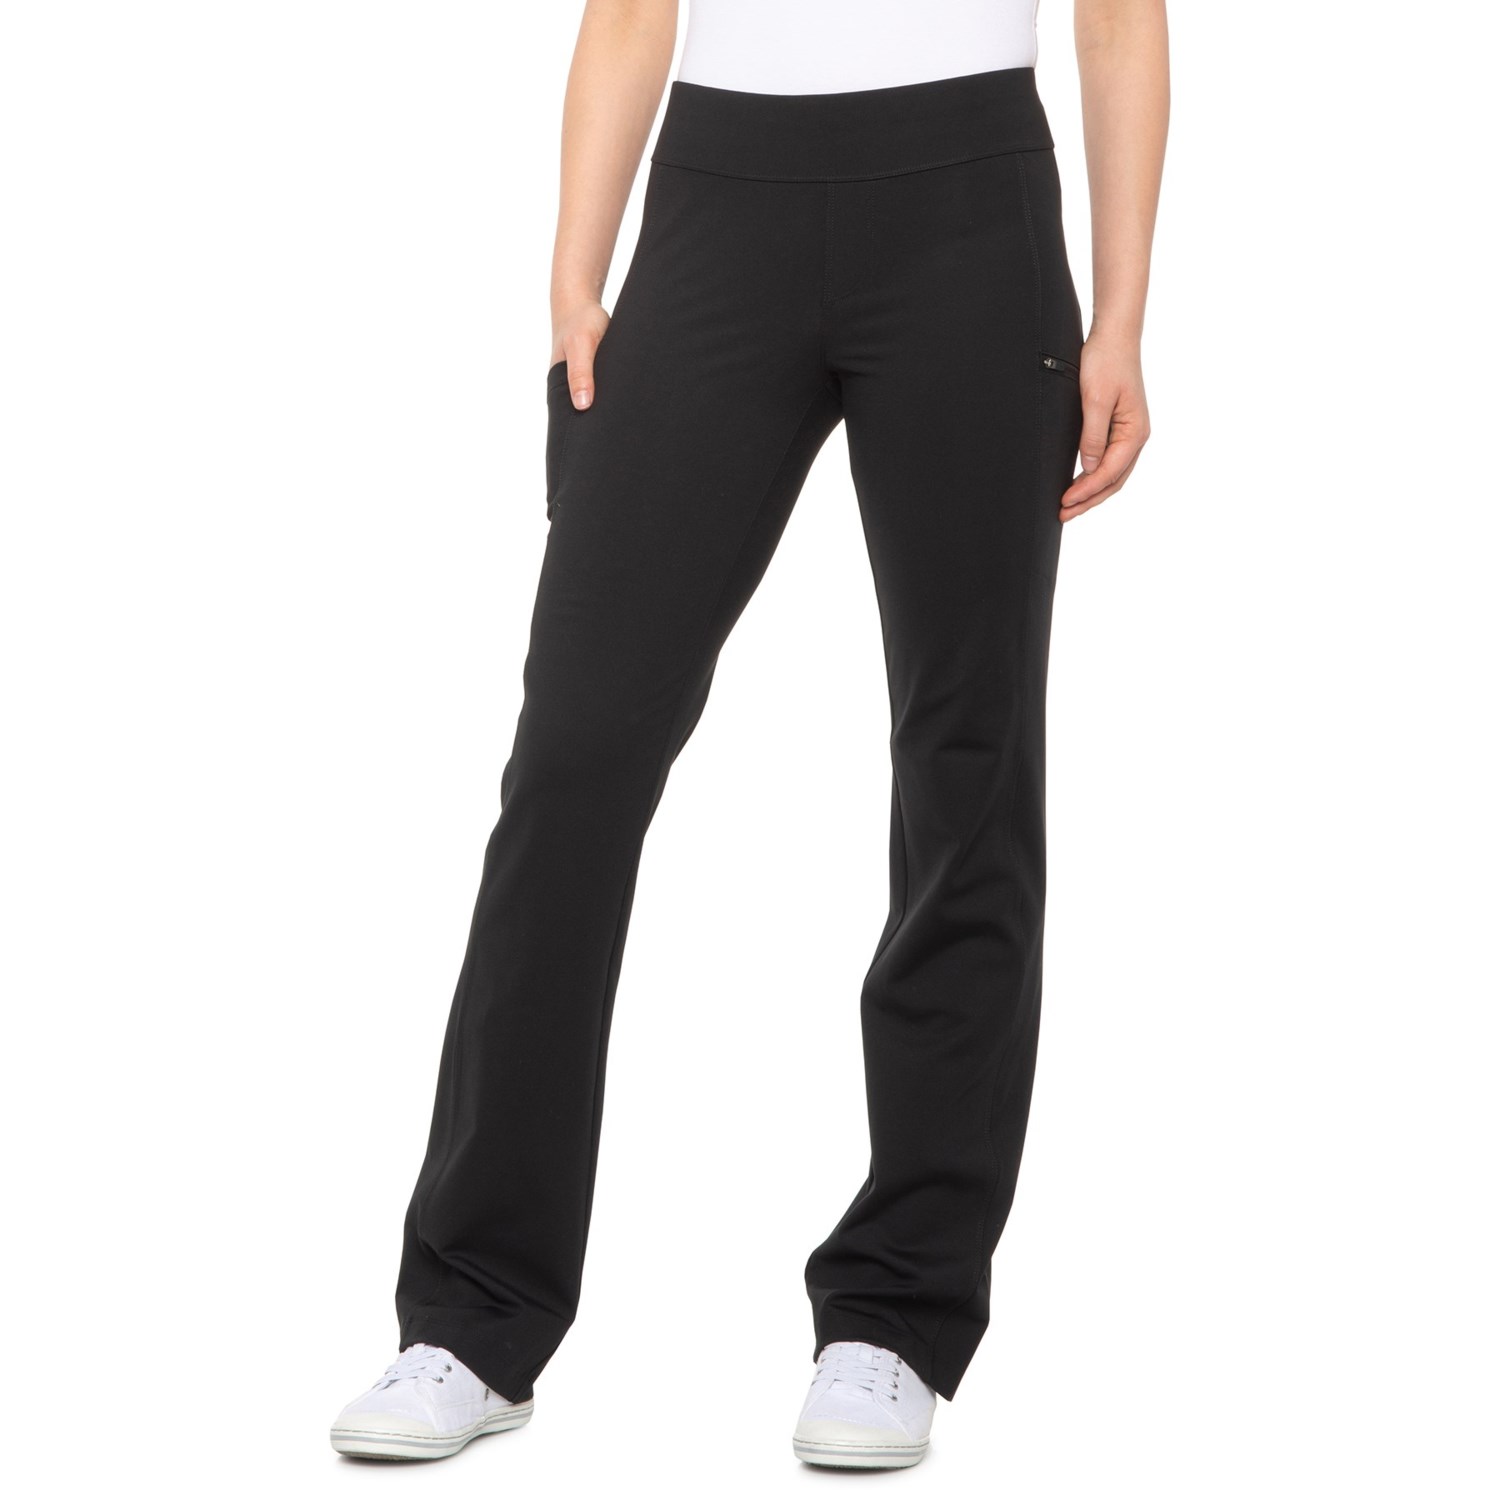 Royal Robbins Jammer Knit Pants (For Women) - Save 47%